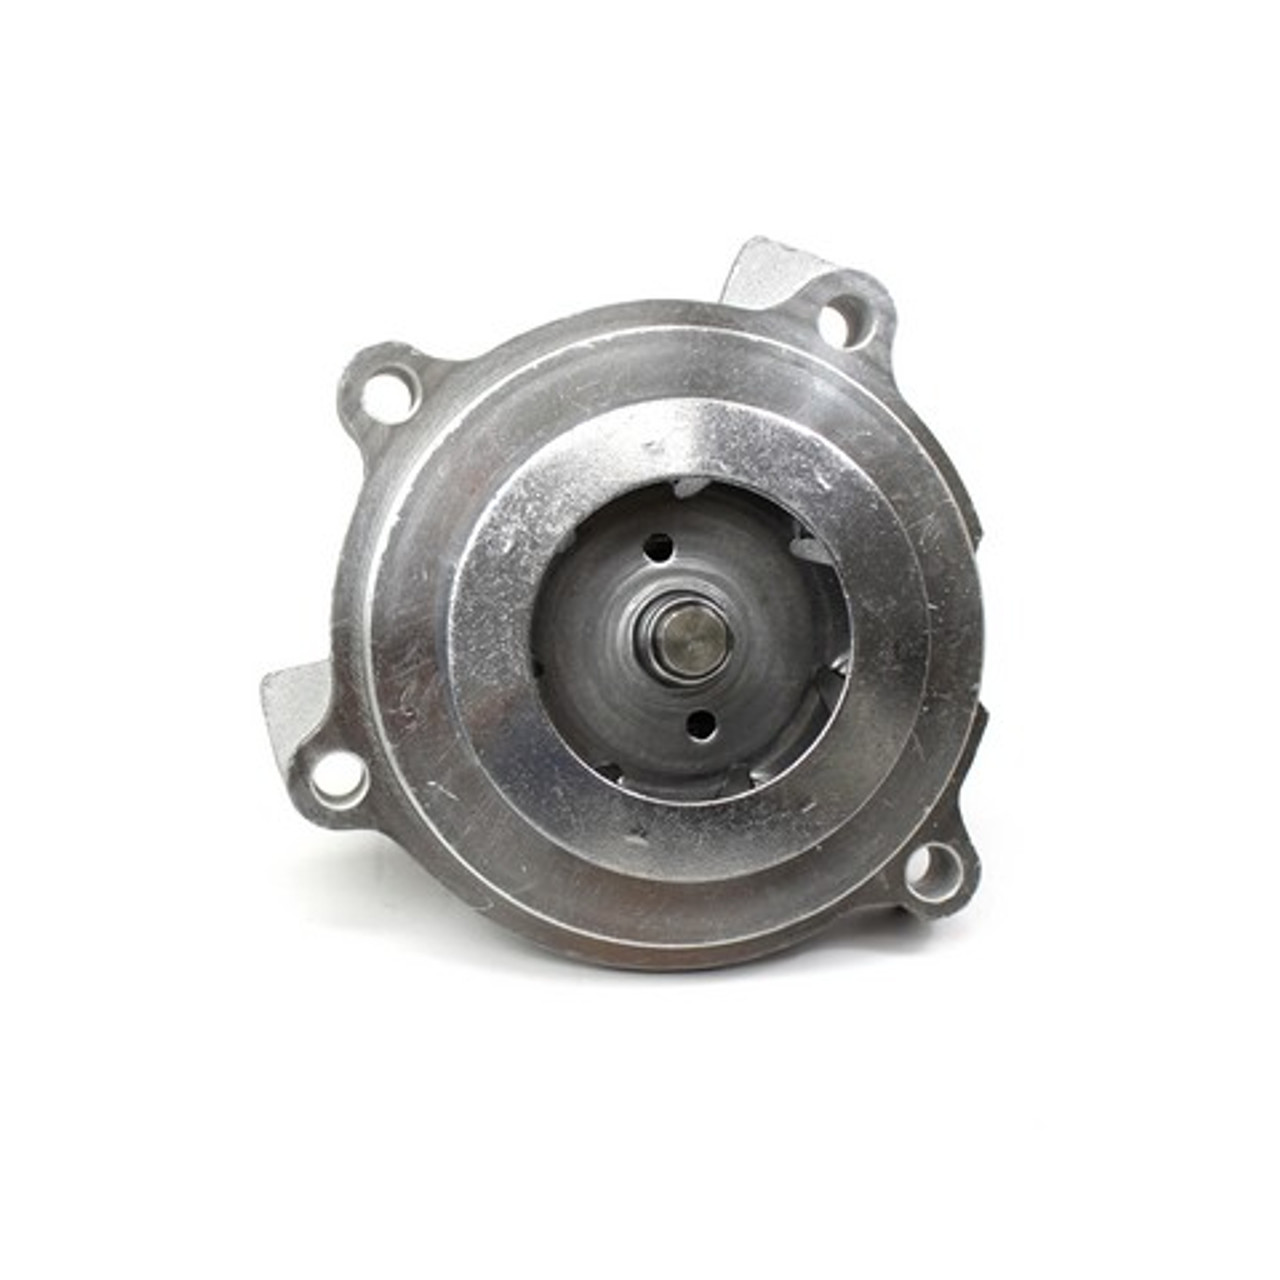 Water Pump 4.6L 2002 Ford Mustang - WP4136.16